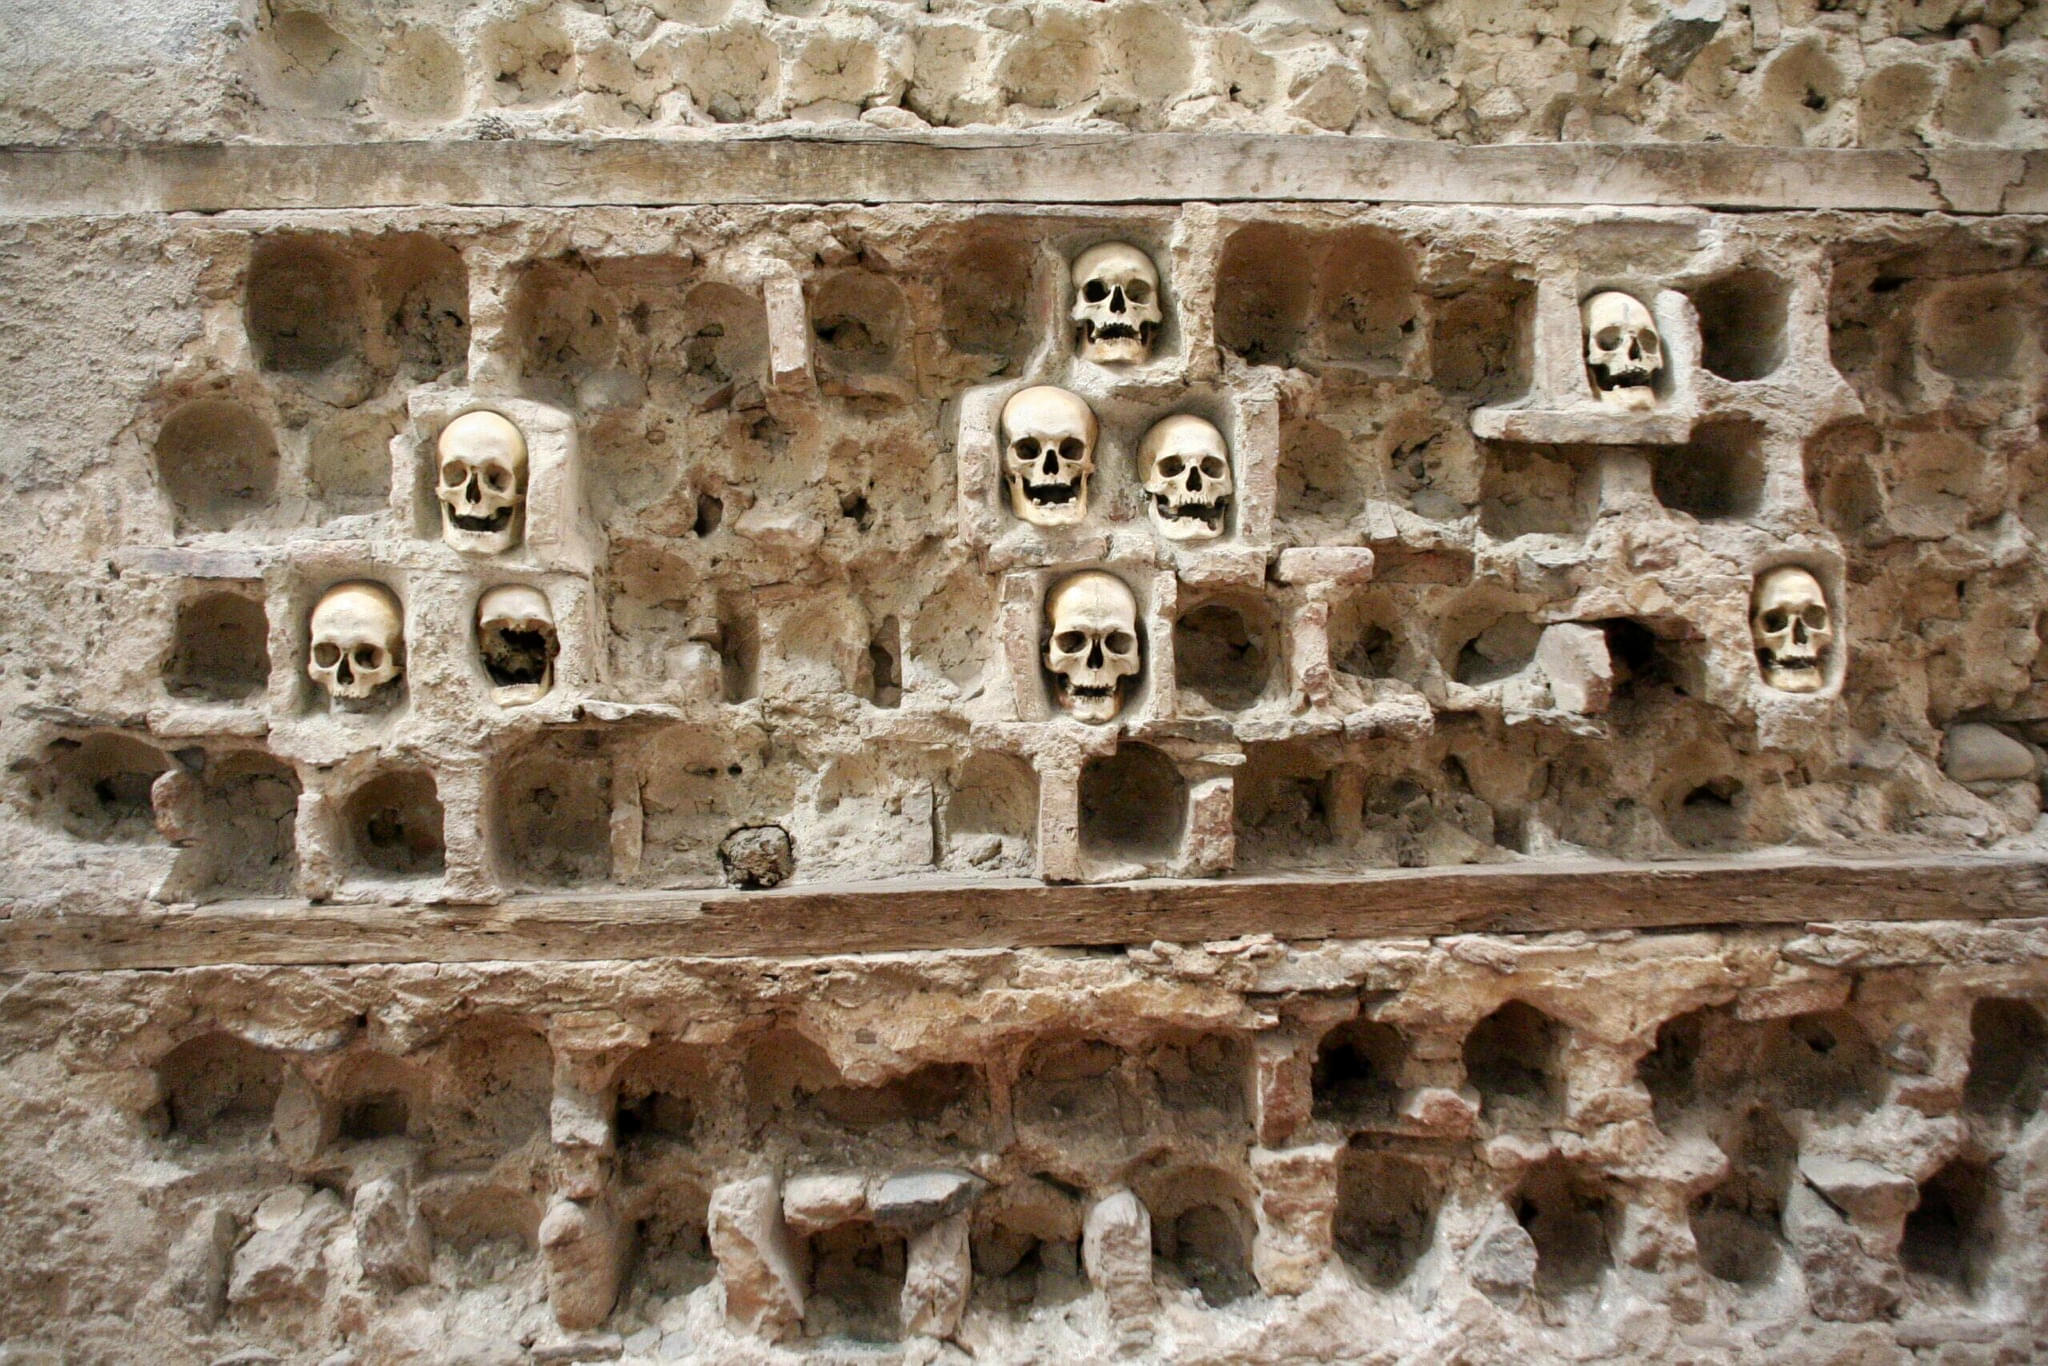 Skull Tower Overview